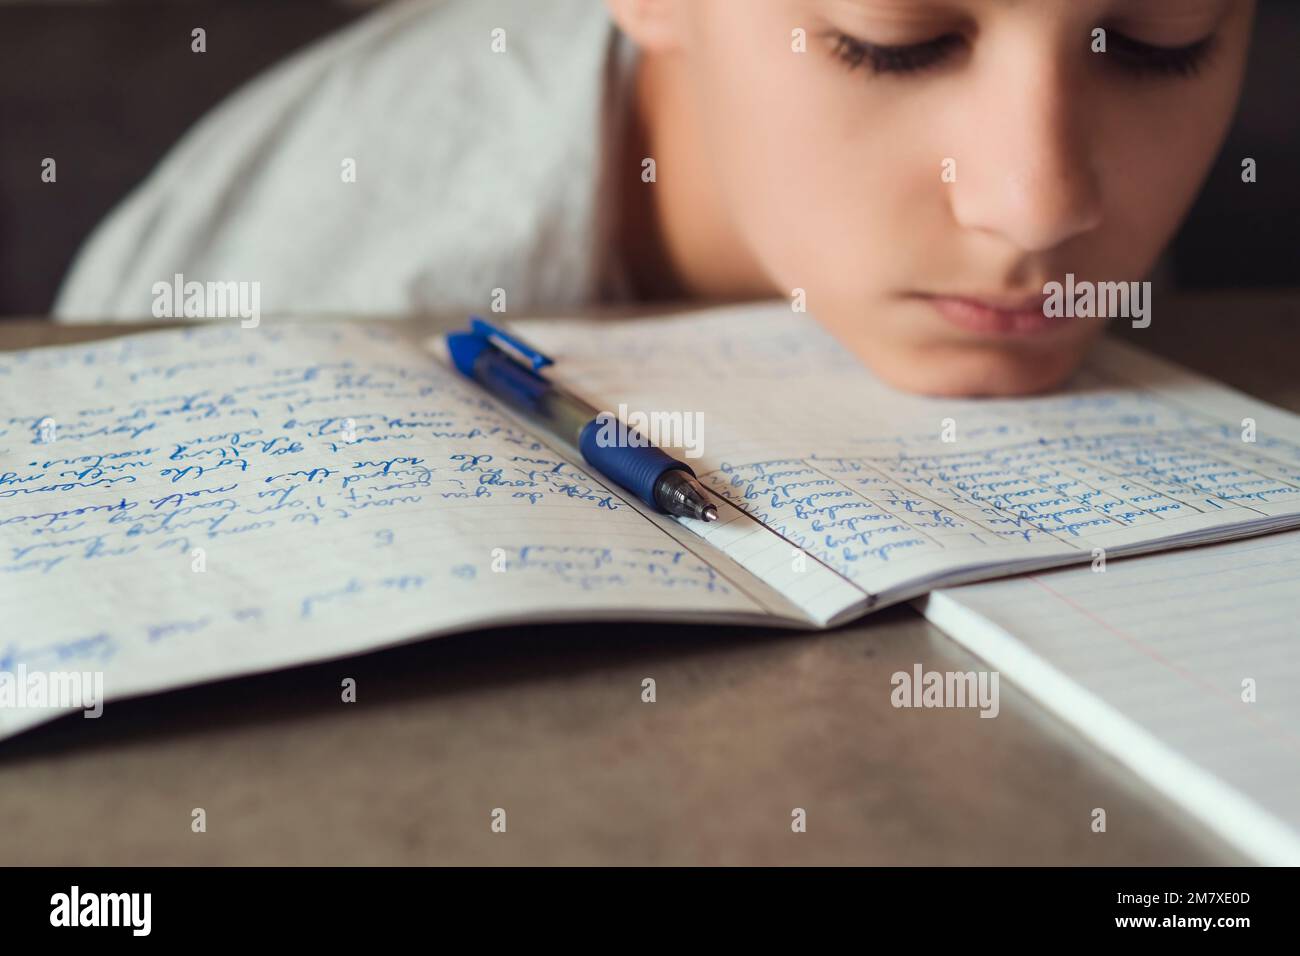 Sad tired boy sitting and looking in to books and notebooks. Education, school, learning difficulties, dyslexia concept Stock Photo